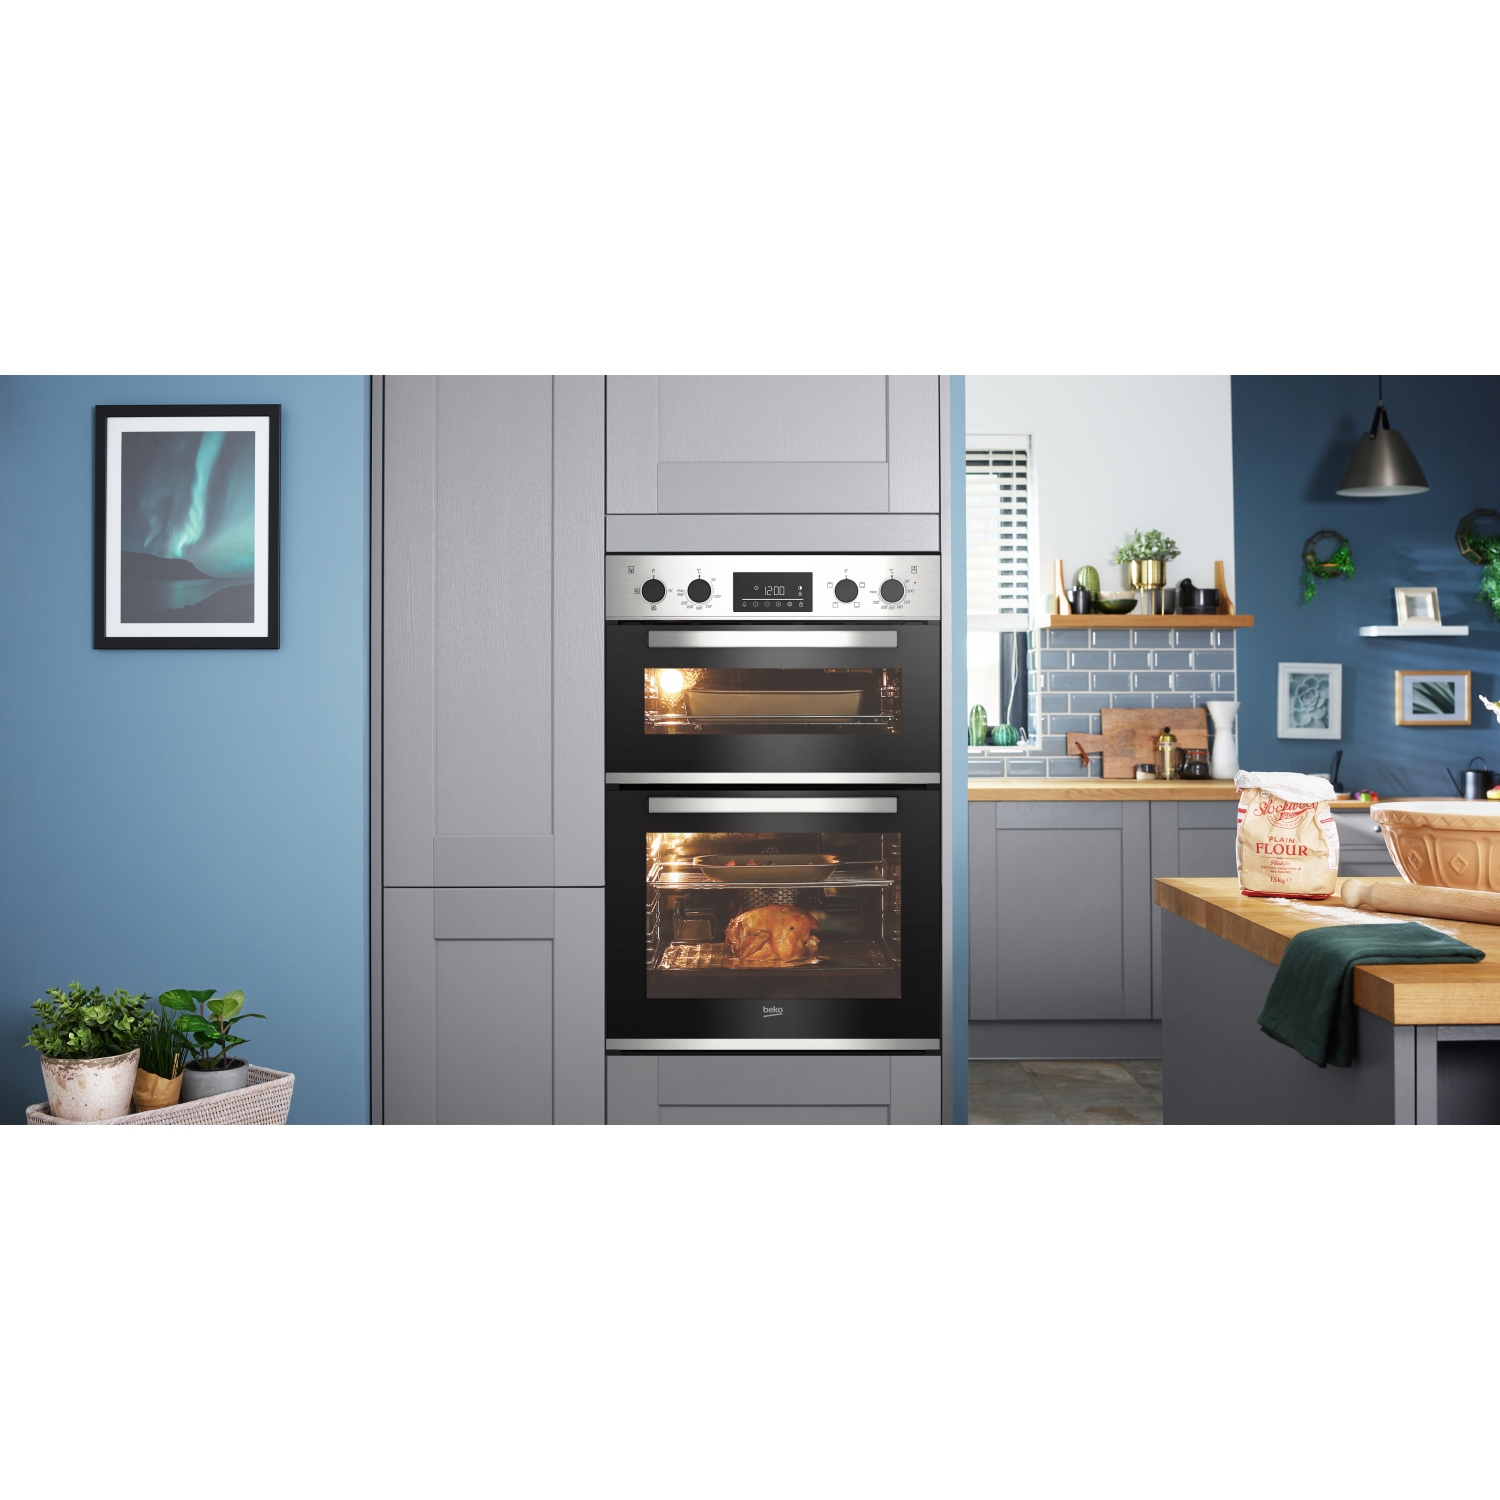 Beko CDFY22309X 60cm Built In High Specification RecycledNet&trade; Double Oven - Stainless Steel - 4